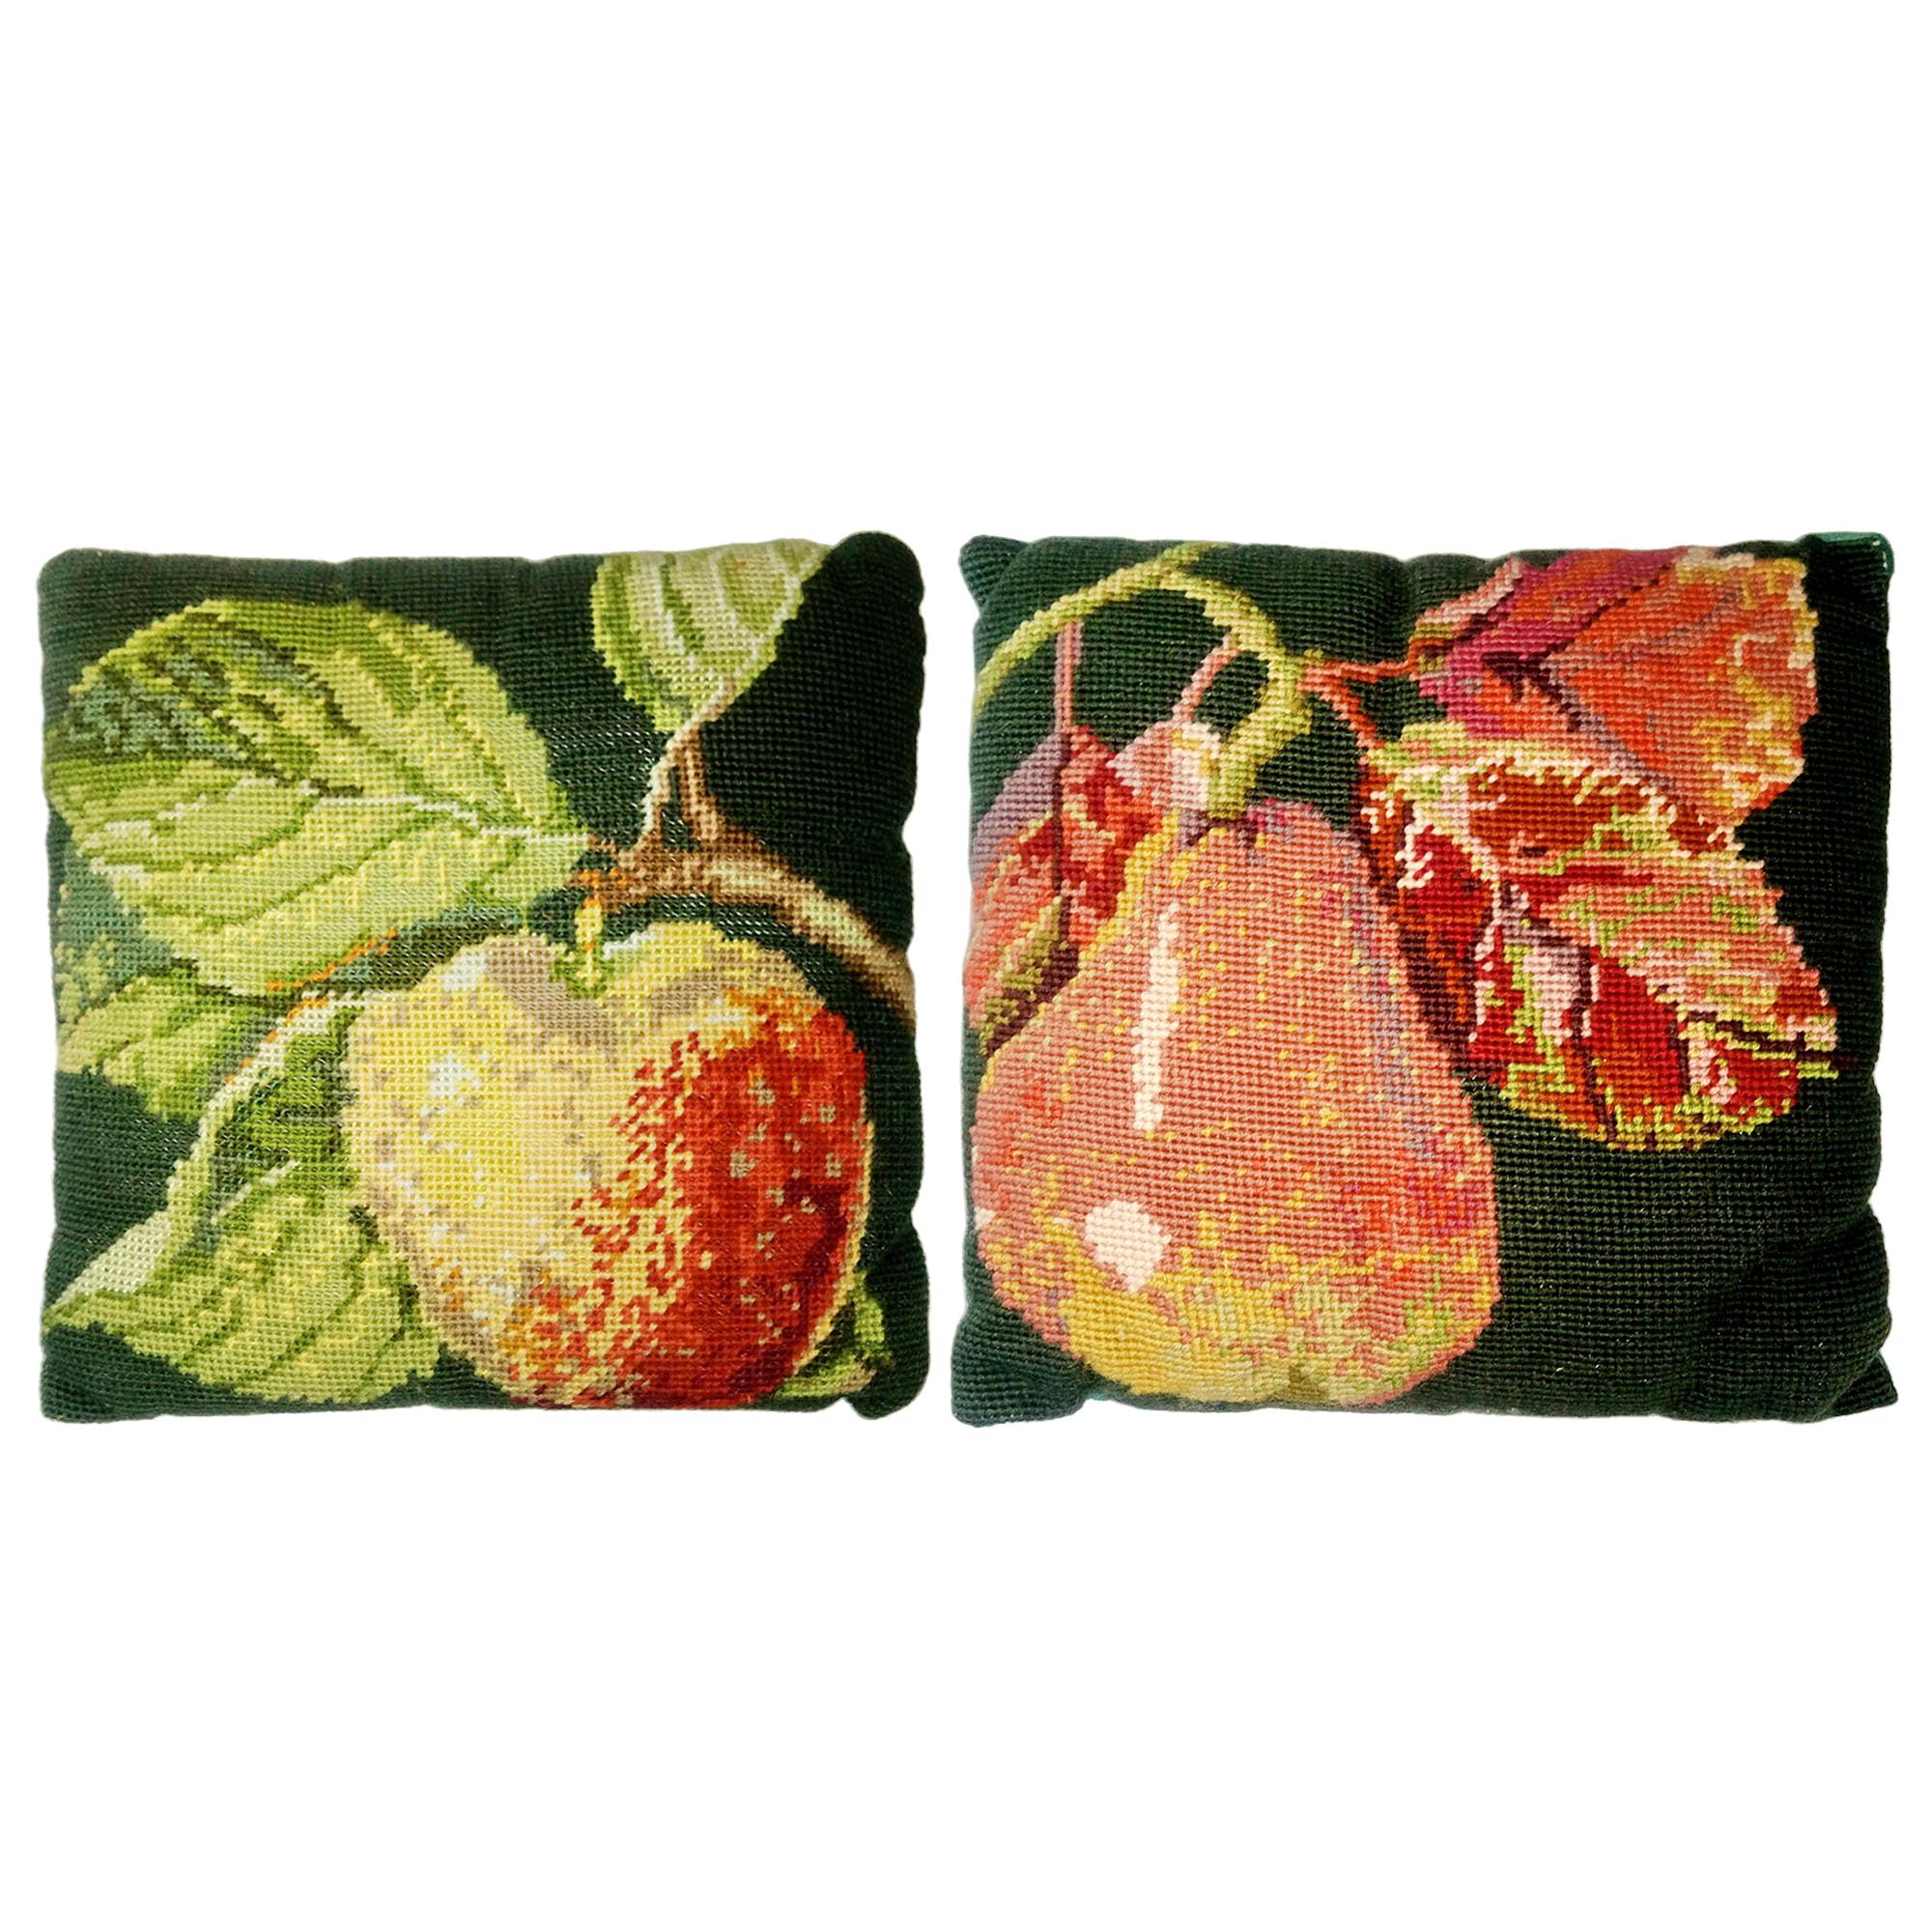 Vintage Pair of Petit Point Embroidery Pillows, Cushions, Sweden, 1930s